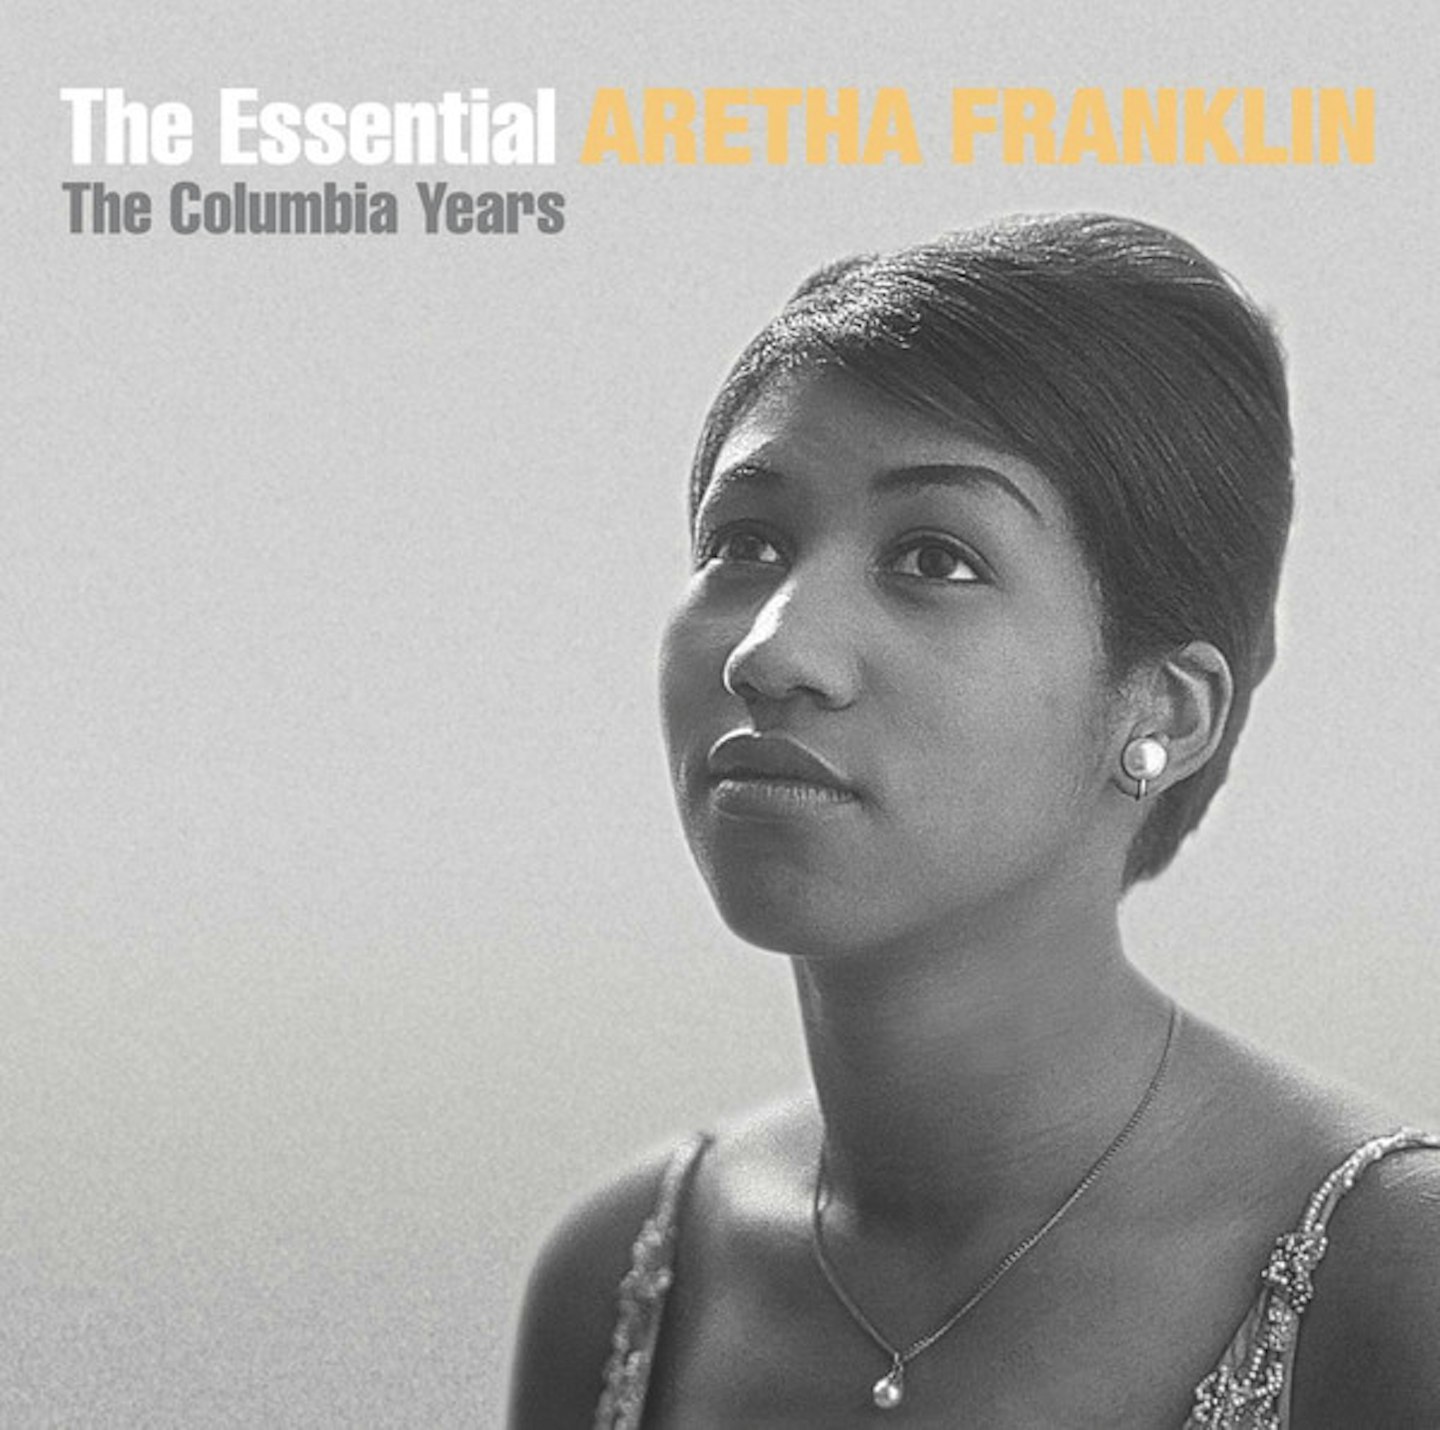 The Essentialu2026 The Columbia Years - Aretha Franklin